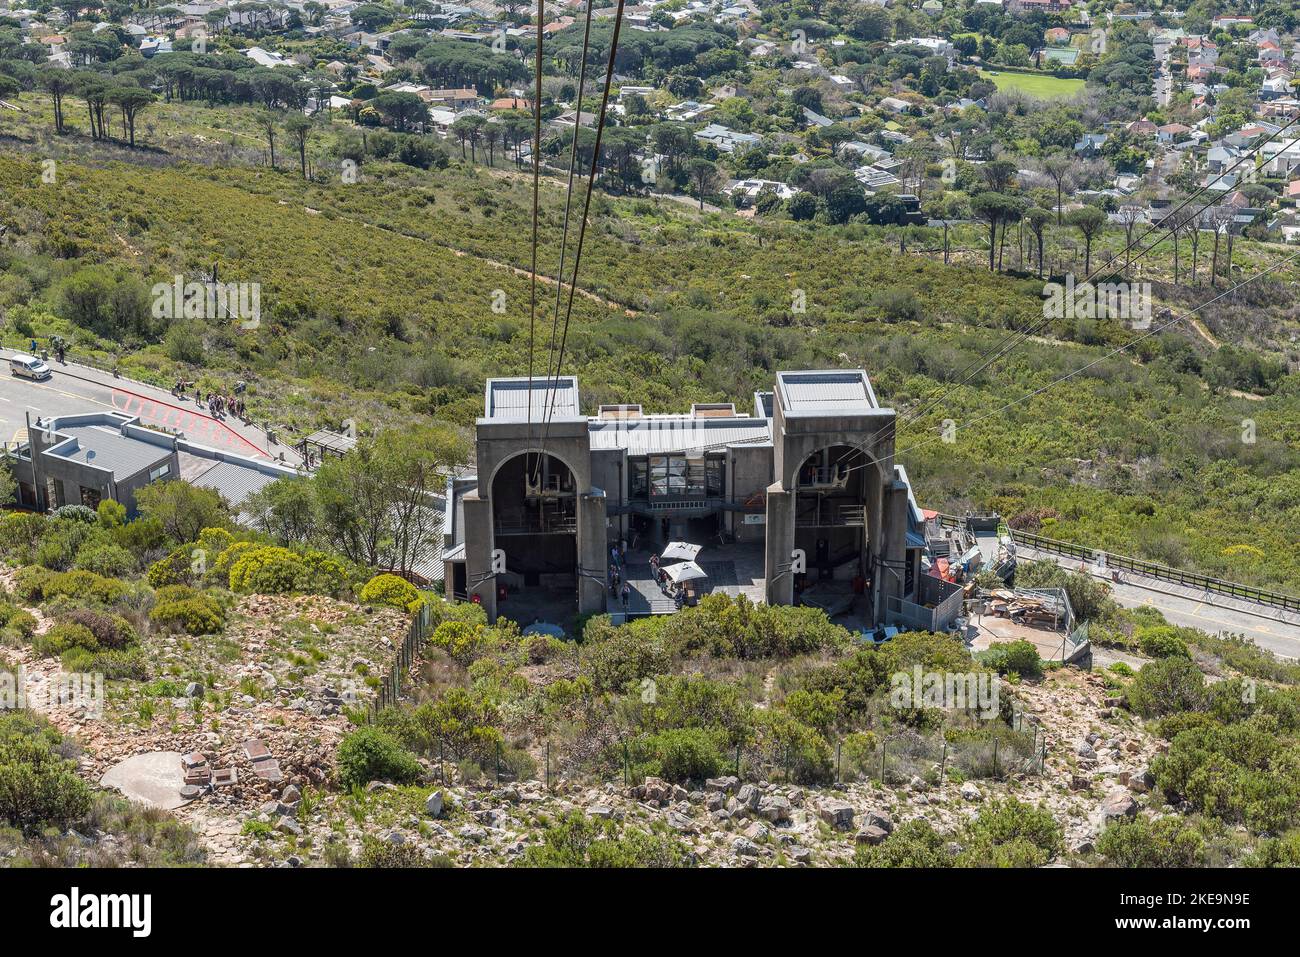 Cape Town, South Africa - Sep 14, 2022: The bottom cableway building on Table Mountain as seen from a cable car Stock Photo